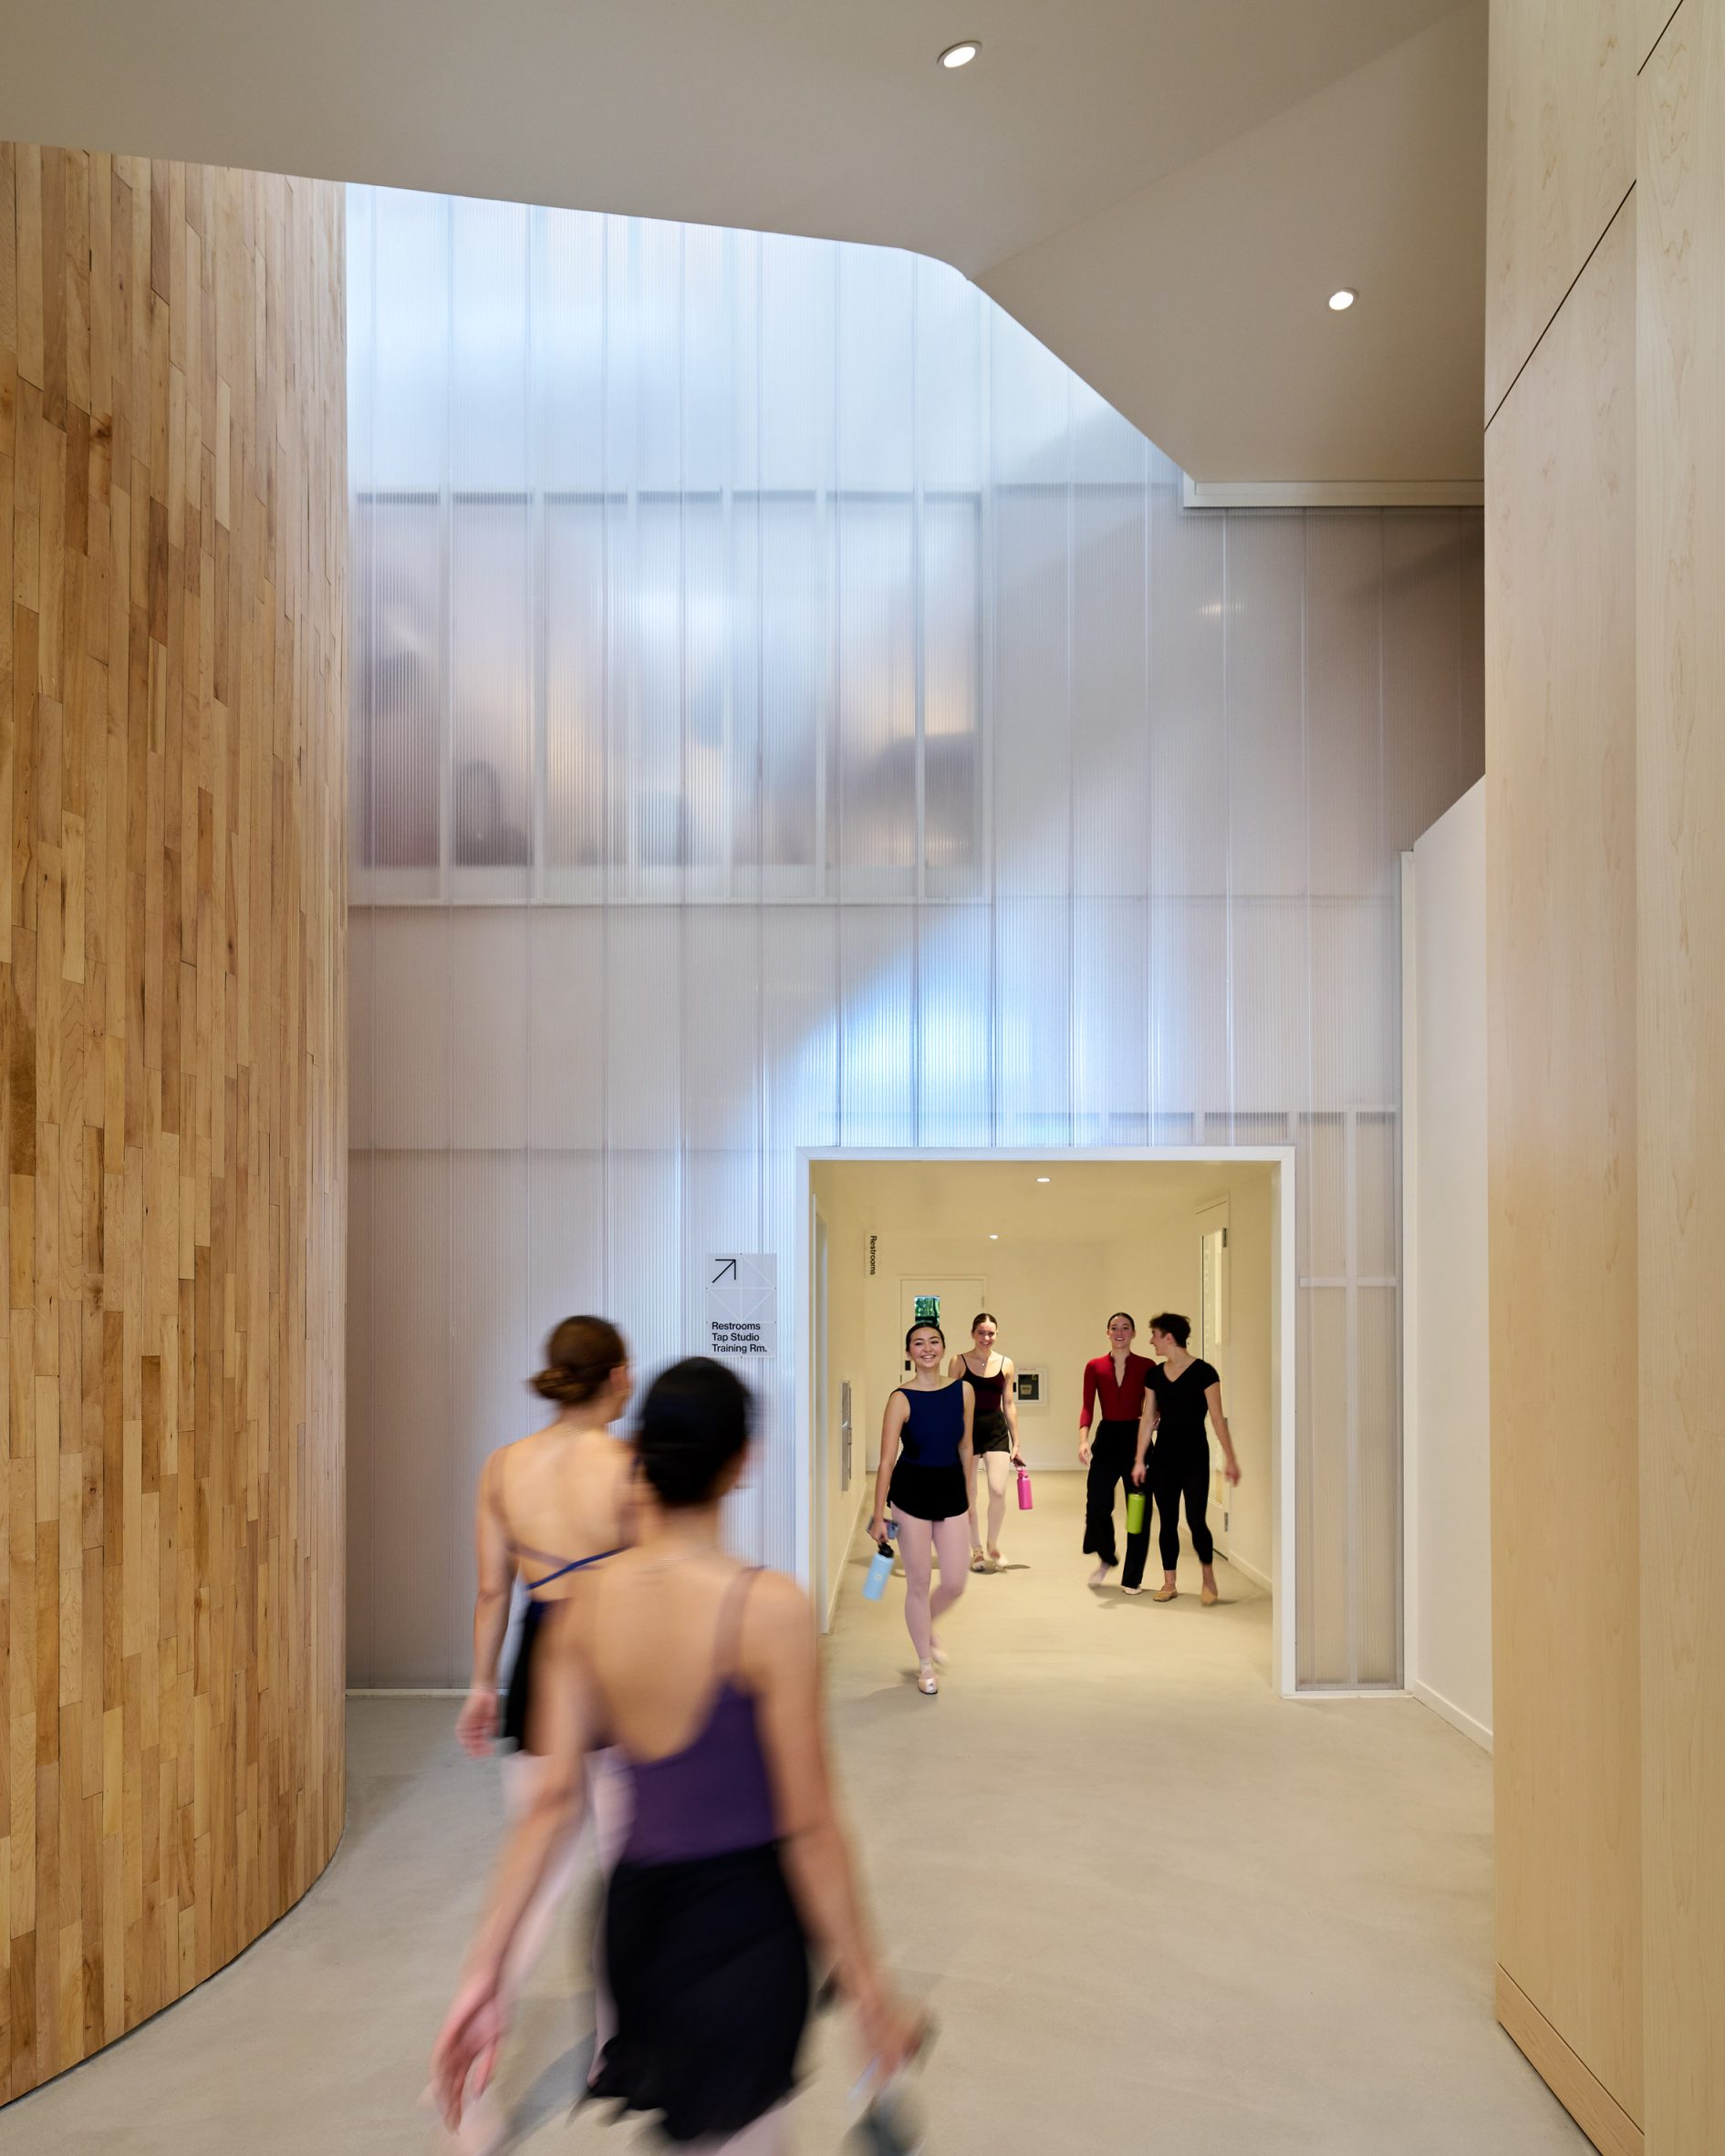 Dance school by LOHA with polycarbonate walls 